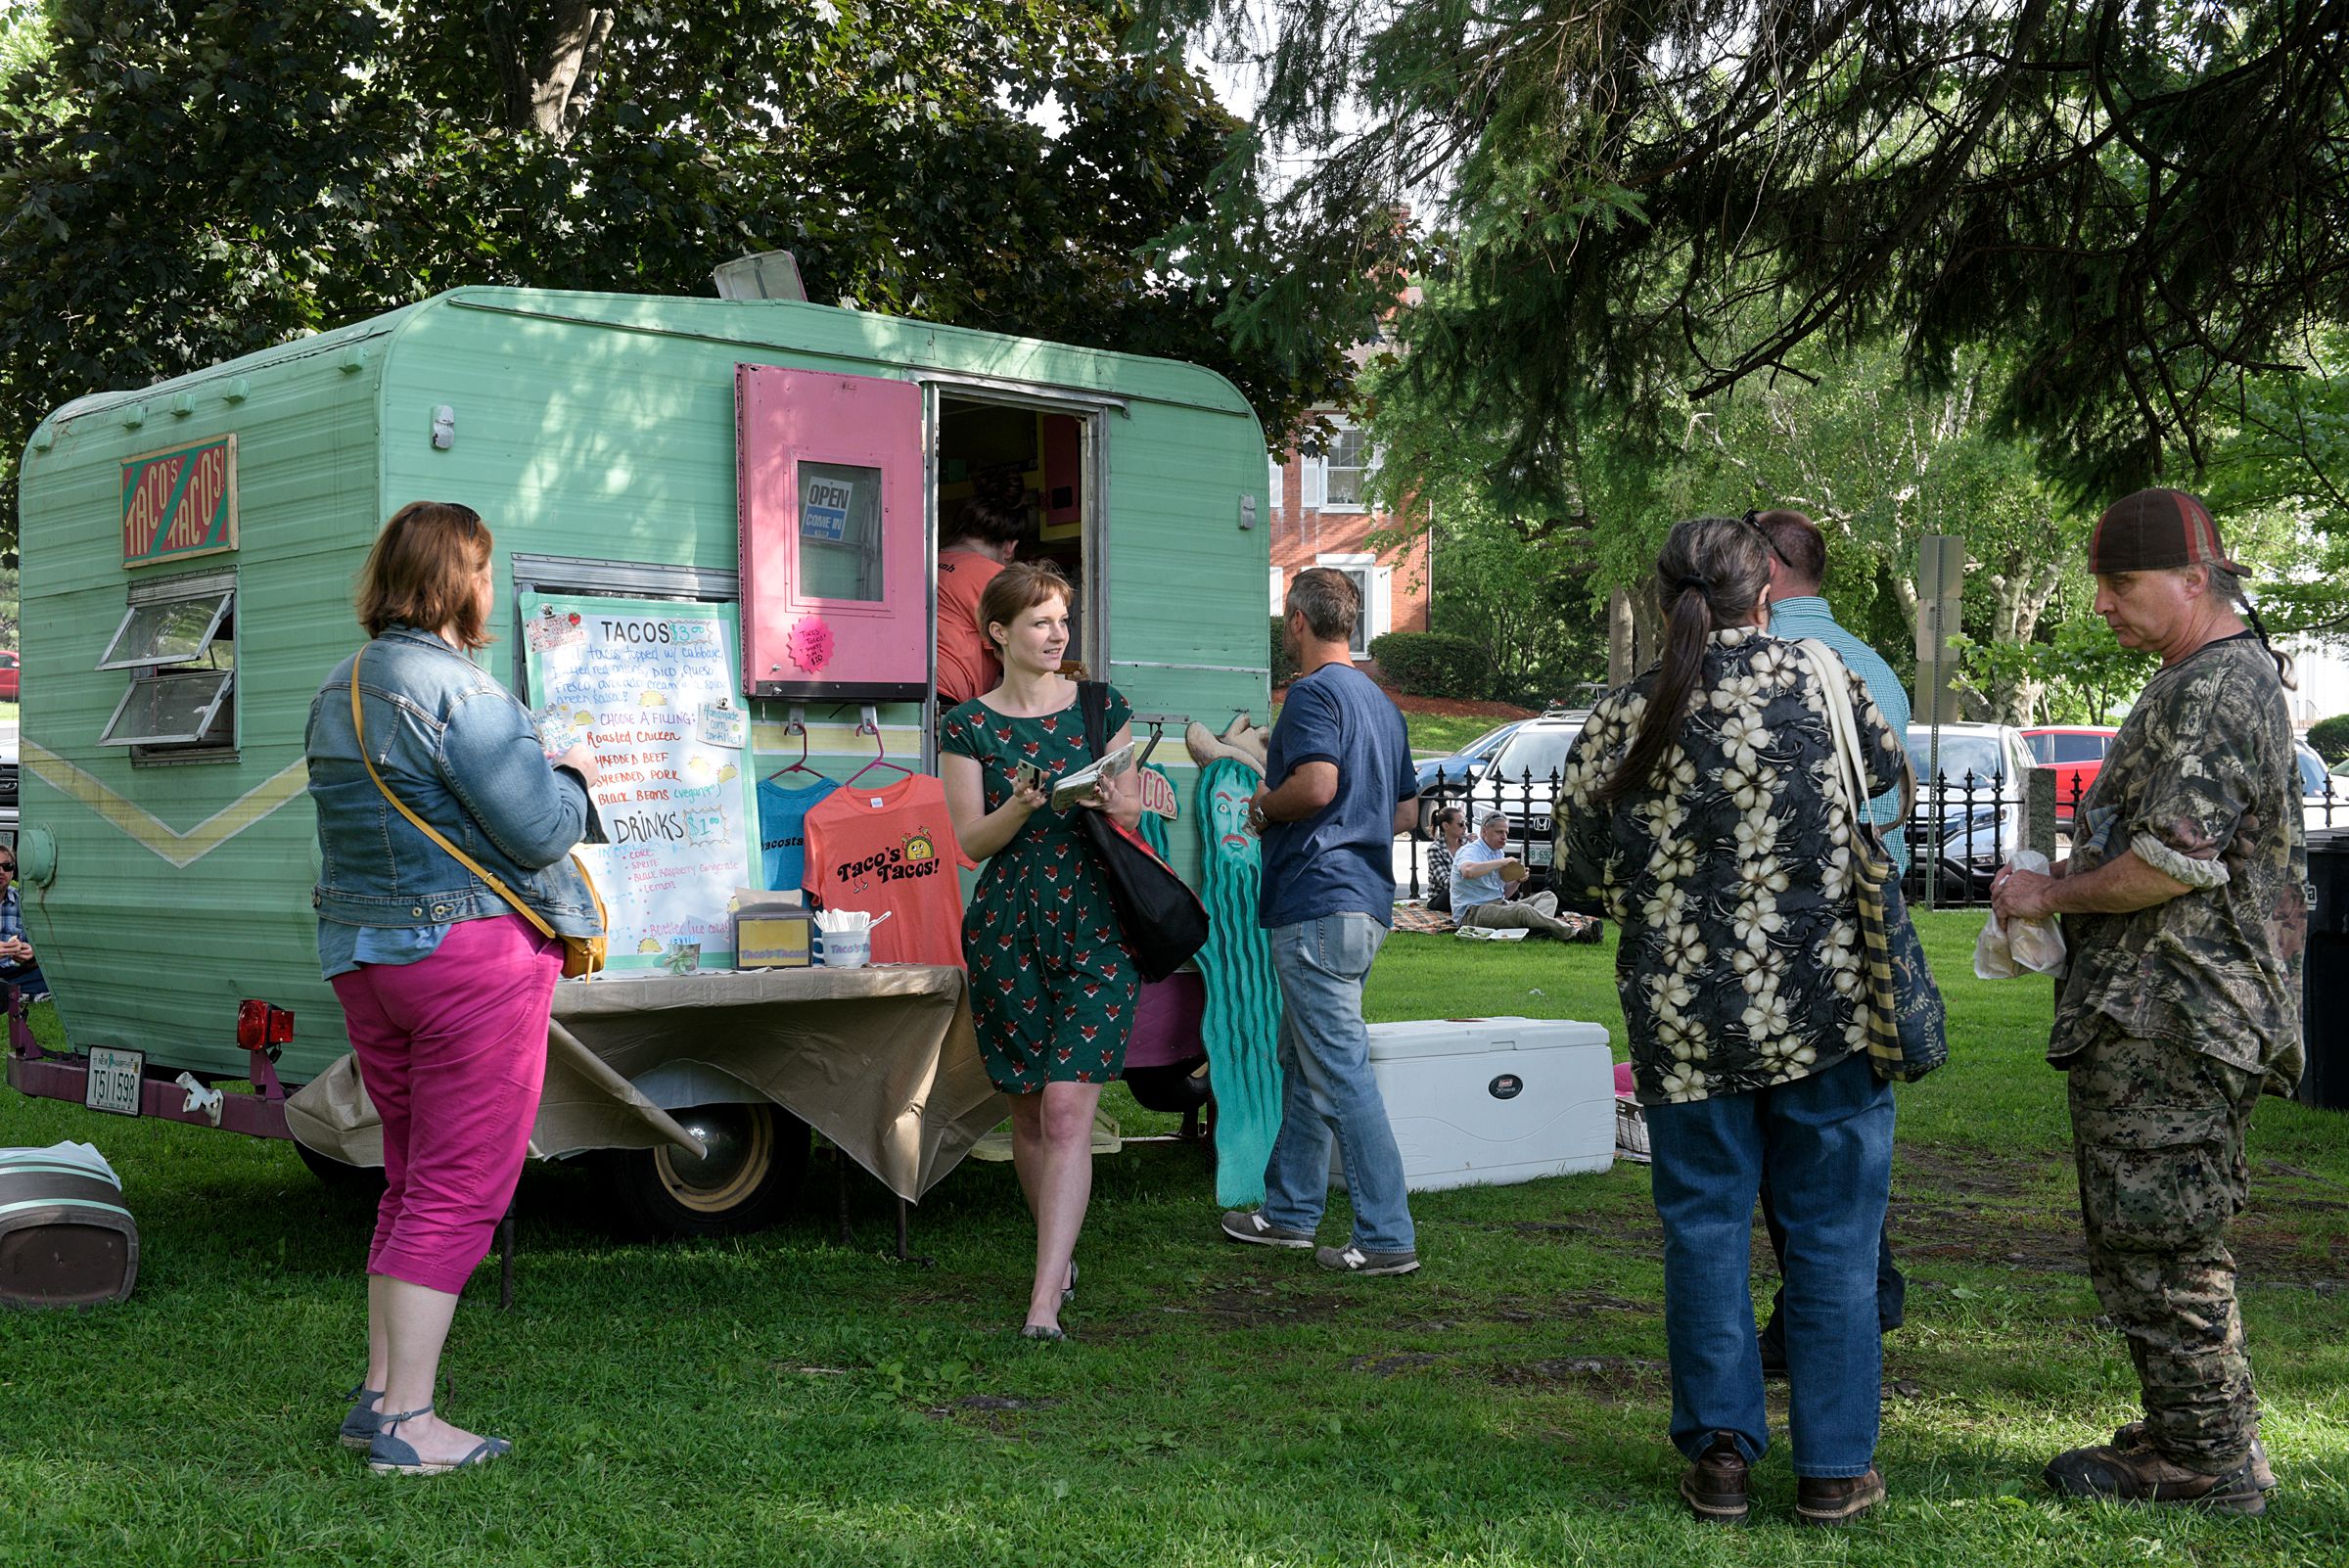 Kymberly Byerly, of Wilder, second from left, steps away from Taco's Tacos after placing her order during the Lebanon (N.H.) Food Truck Festival in Colburn Park, Friday, June 21, 2019. (Valley News - James M. Patterson) Copyright Valley News. May not be reprinted or used online without permission. Send requests to permission@vnews.com.